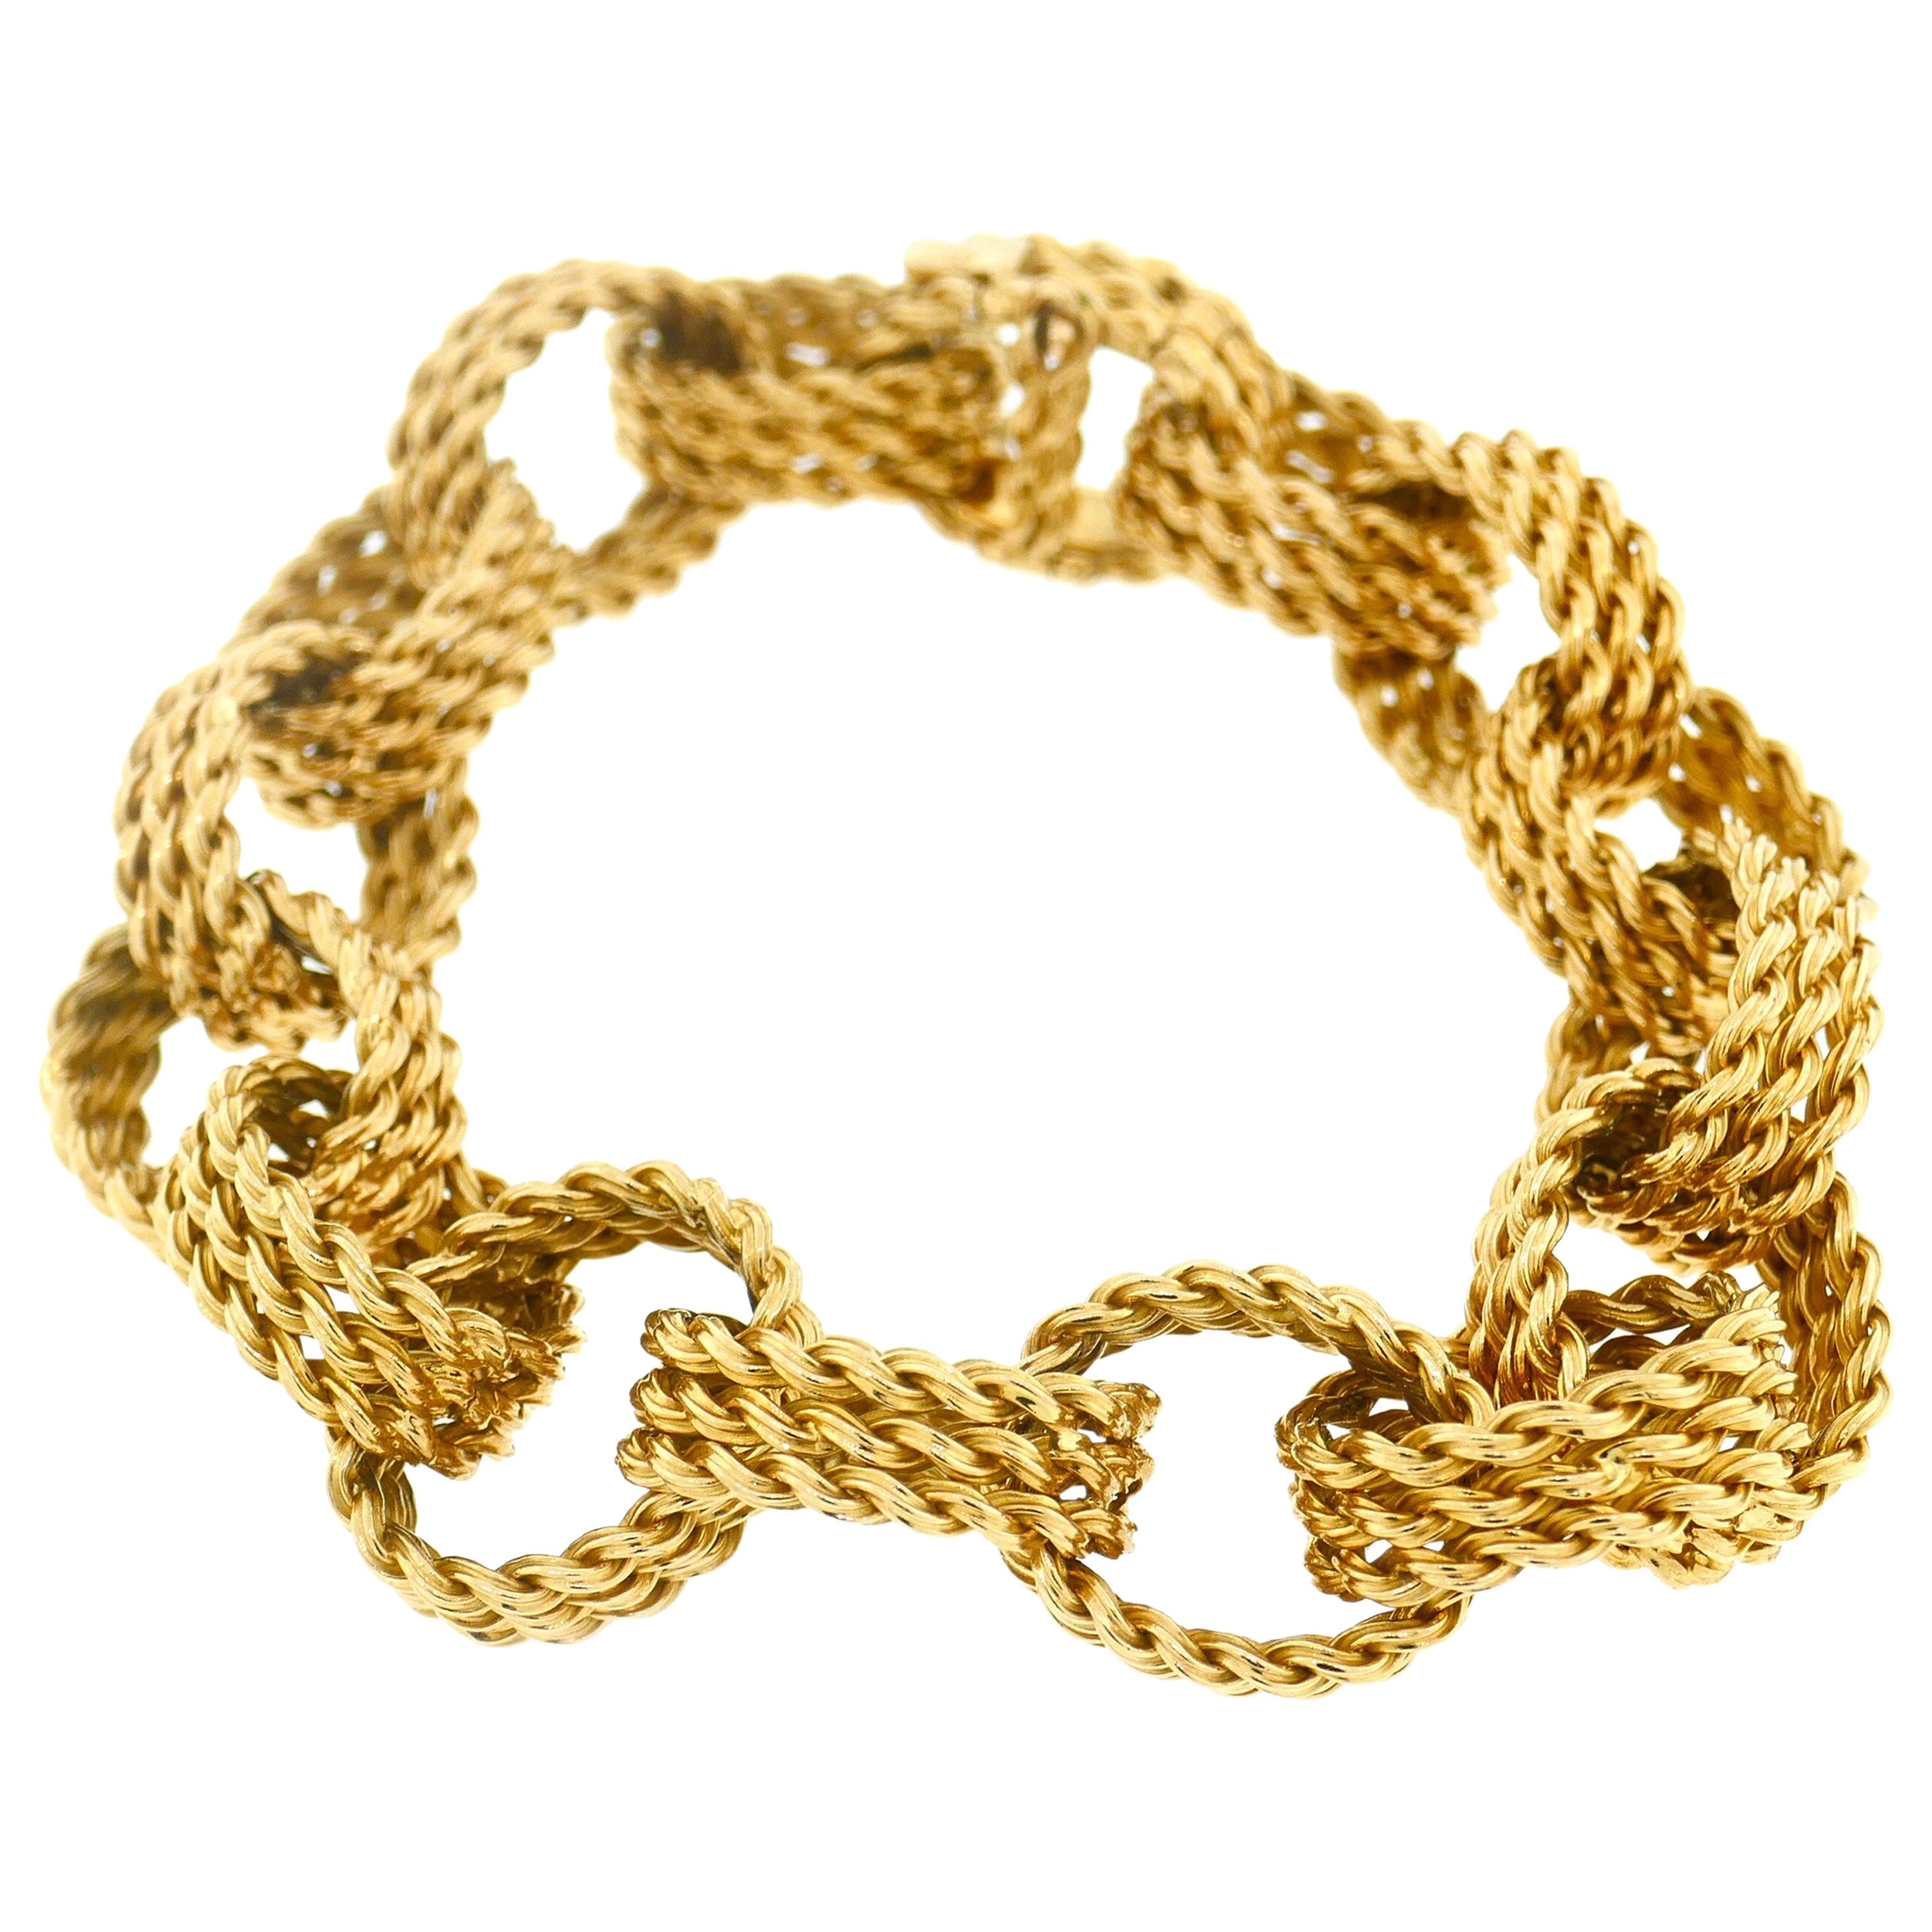 Tiffany & Co. France Yellow Gold Textured Link Bracelet